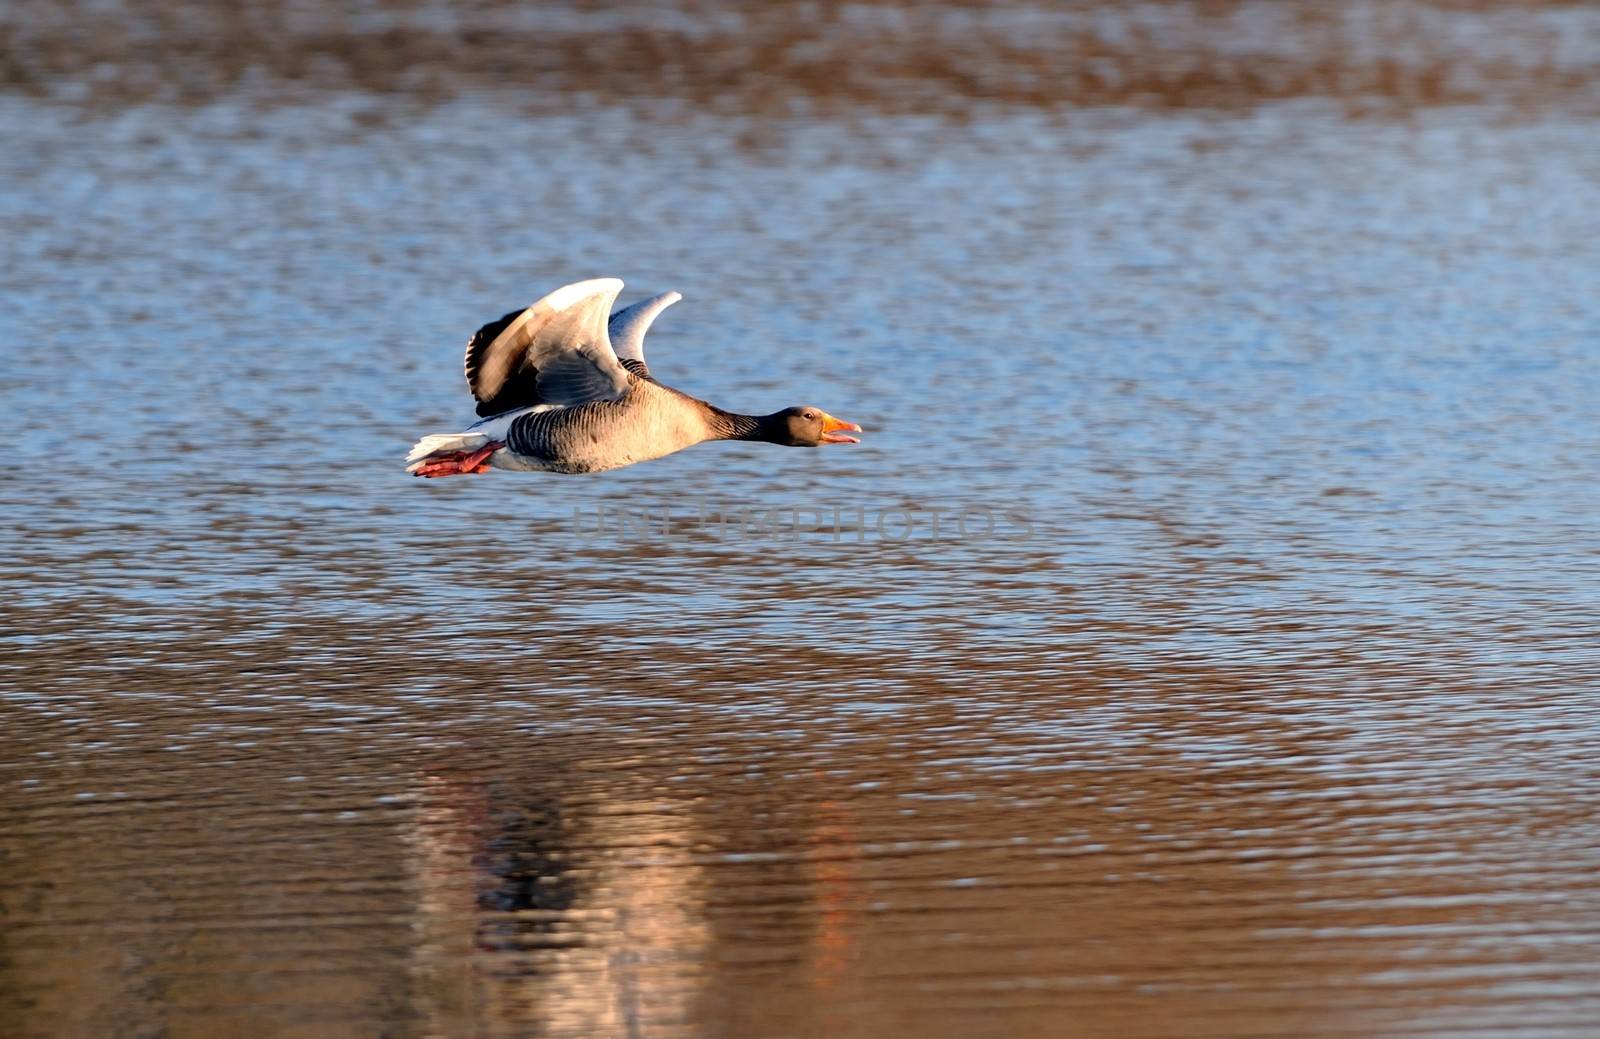 Gray goose in flight over a lake